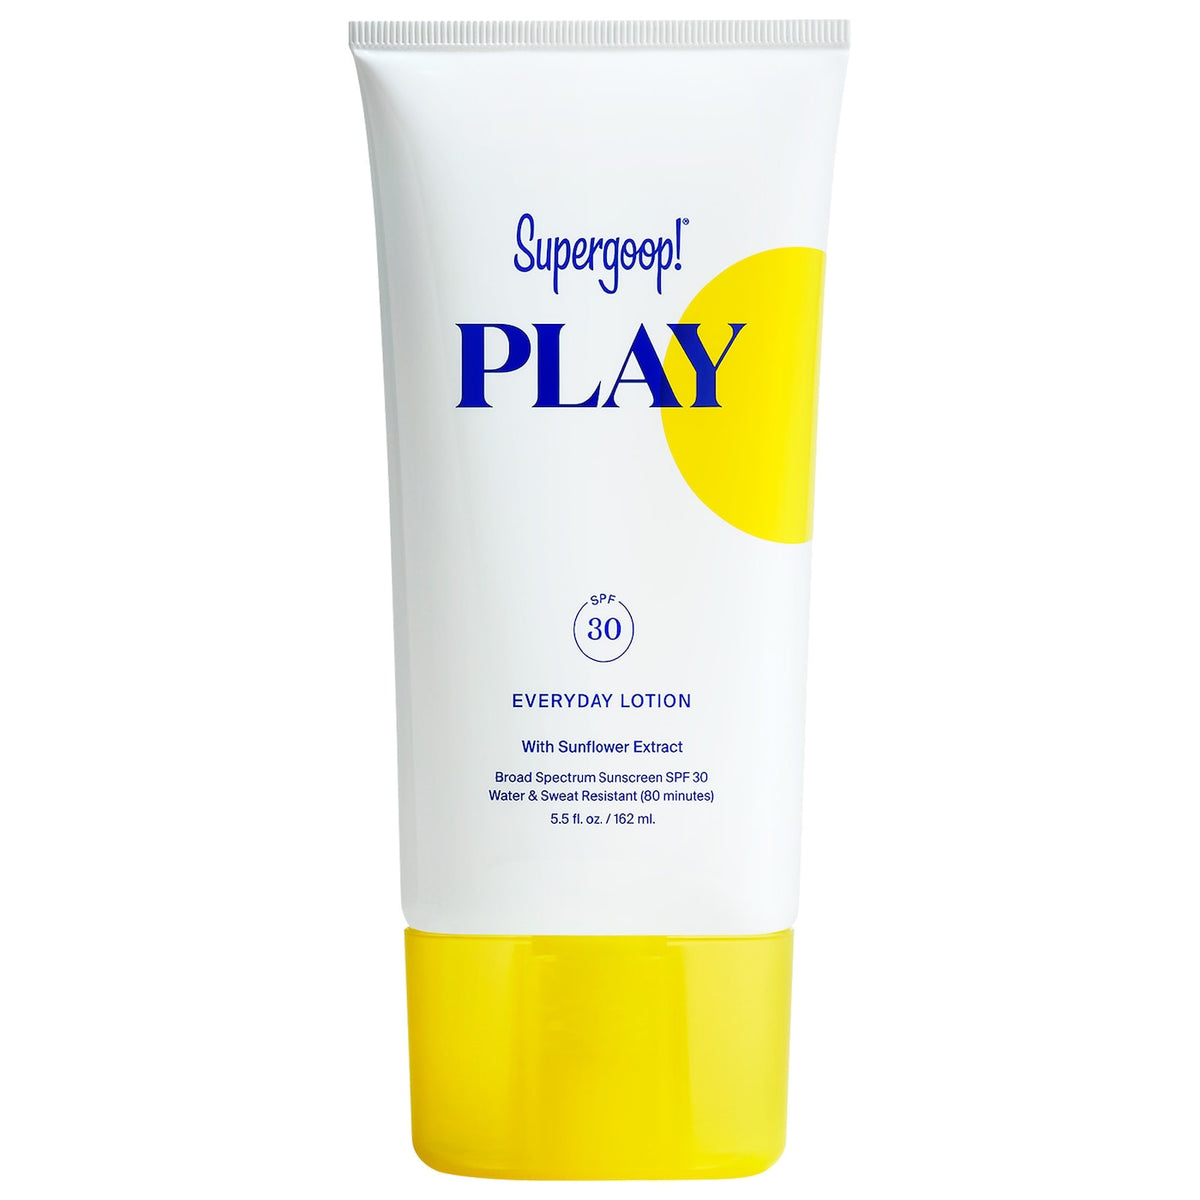 PLAY Everyday Lotion SPF 50 with Sunflower Extract (5.5 oz)